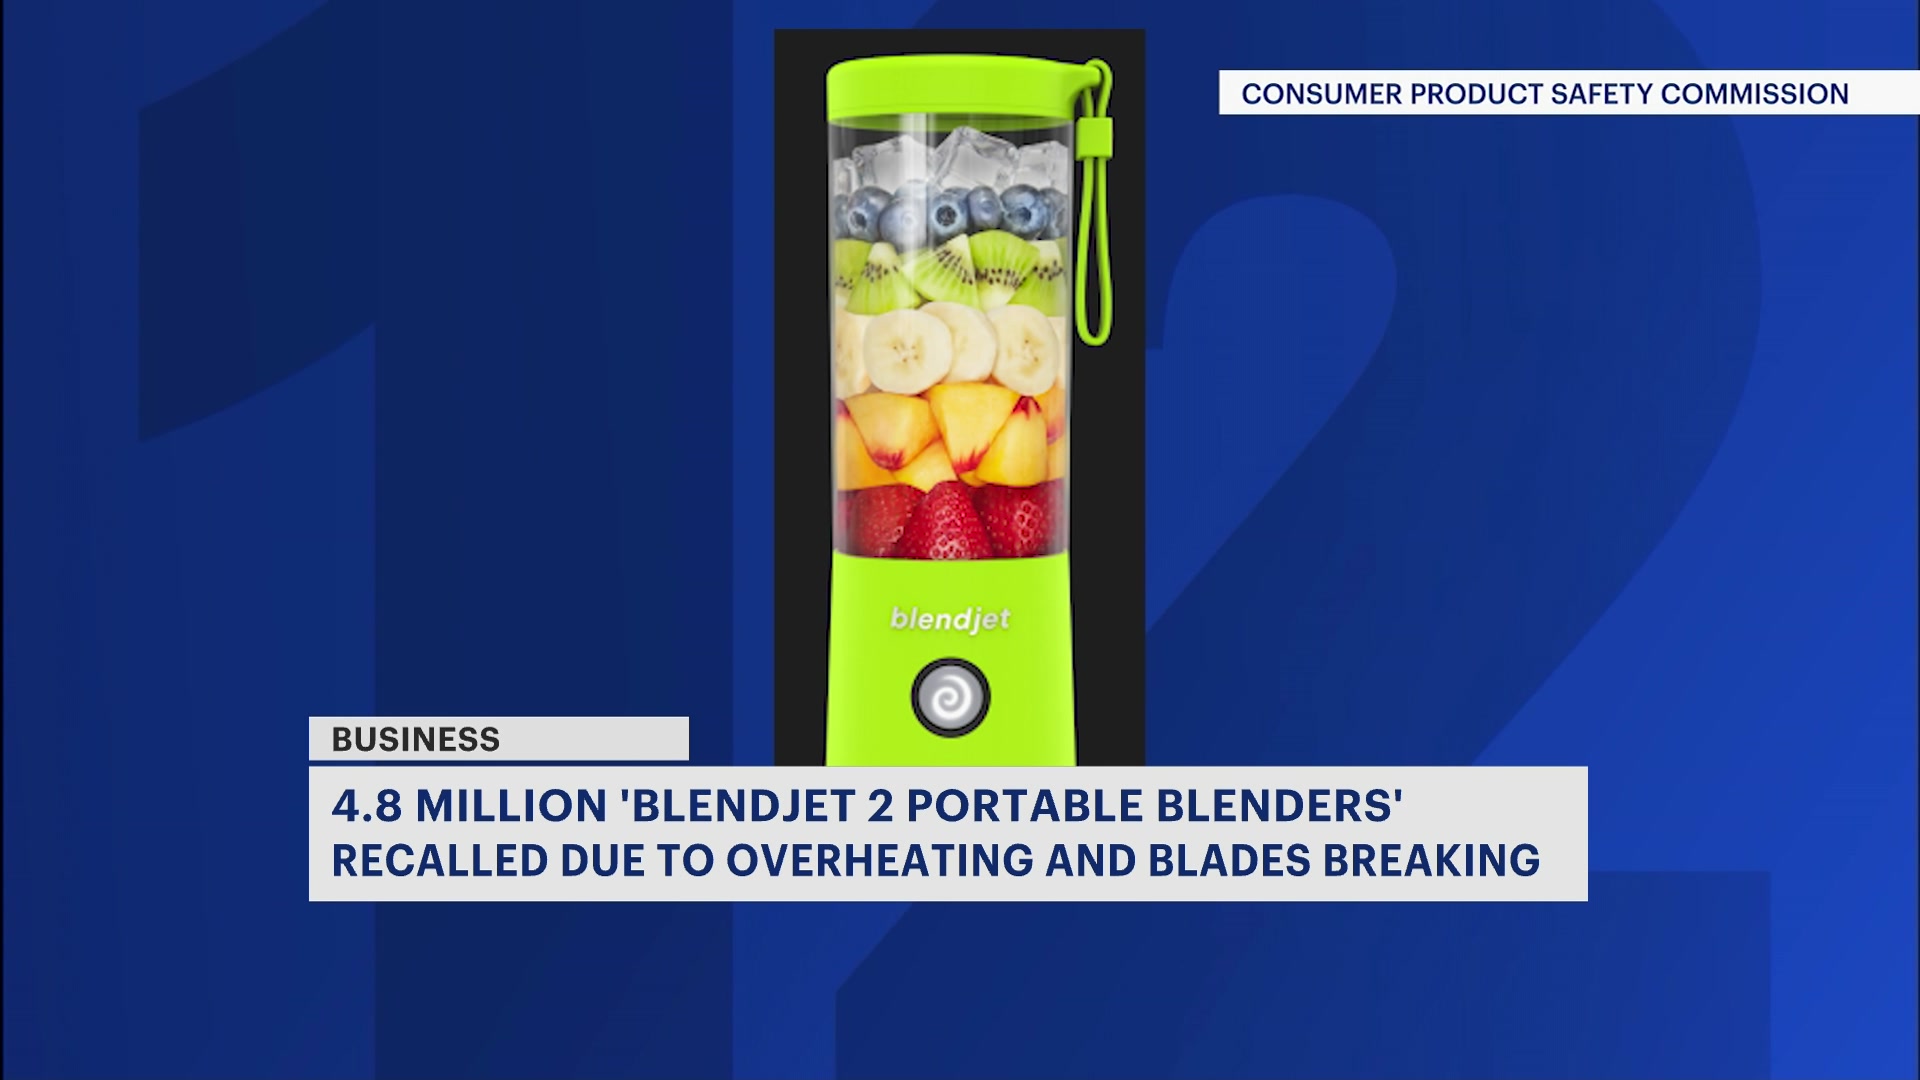 Recall of nearly 5 million portable blenders under way for unsafe